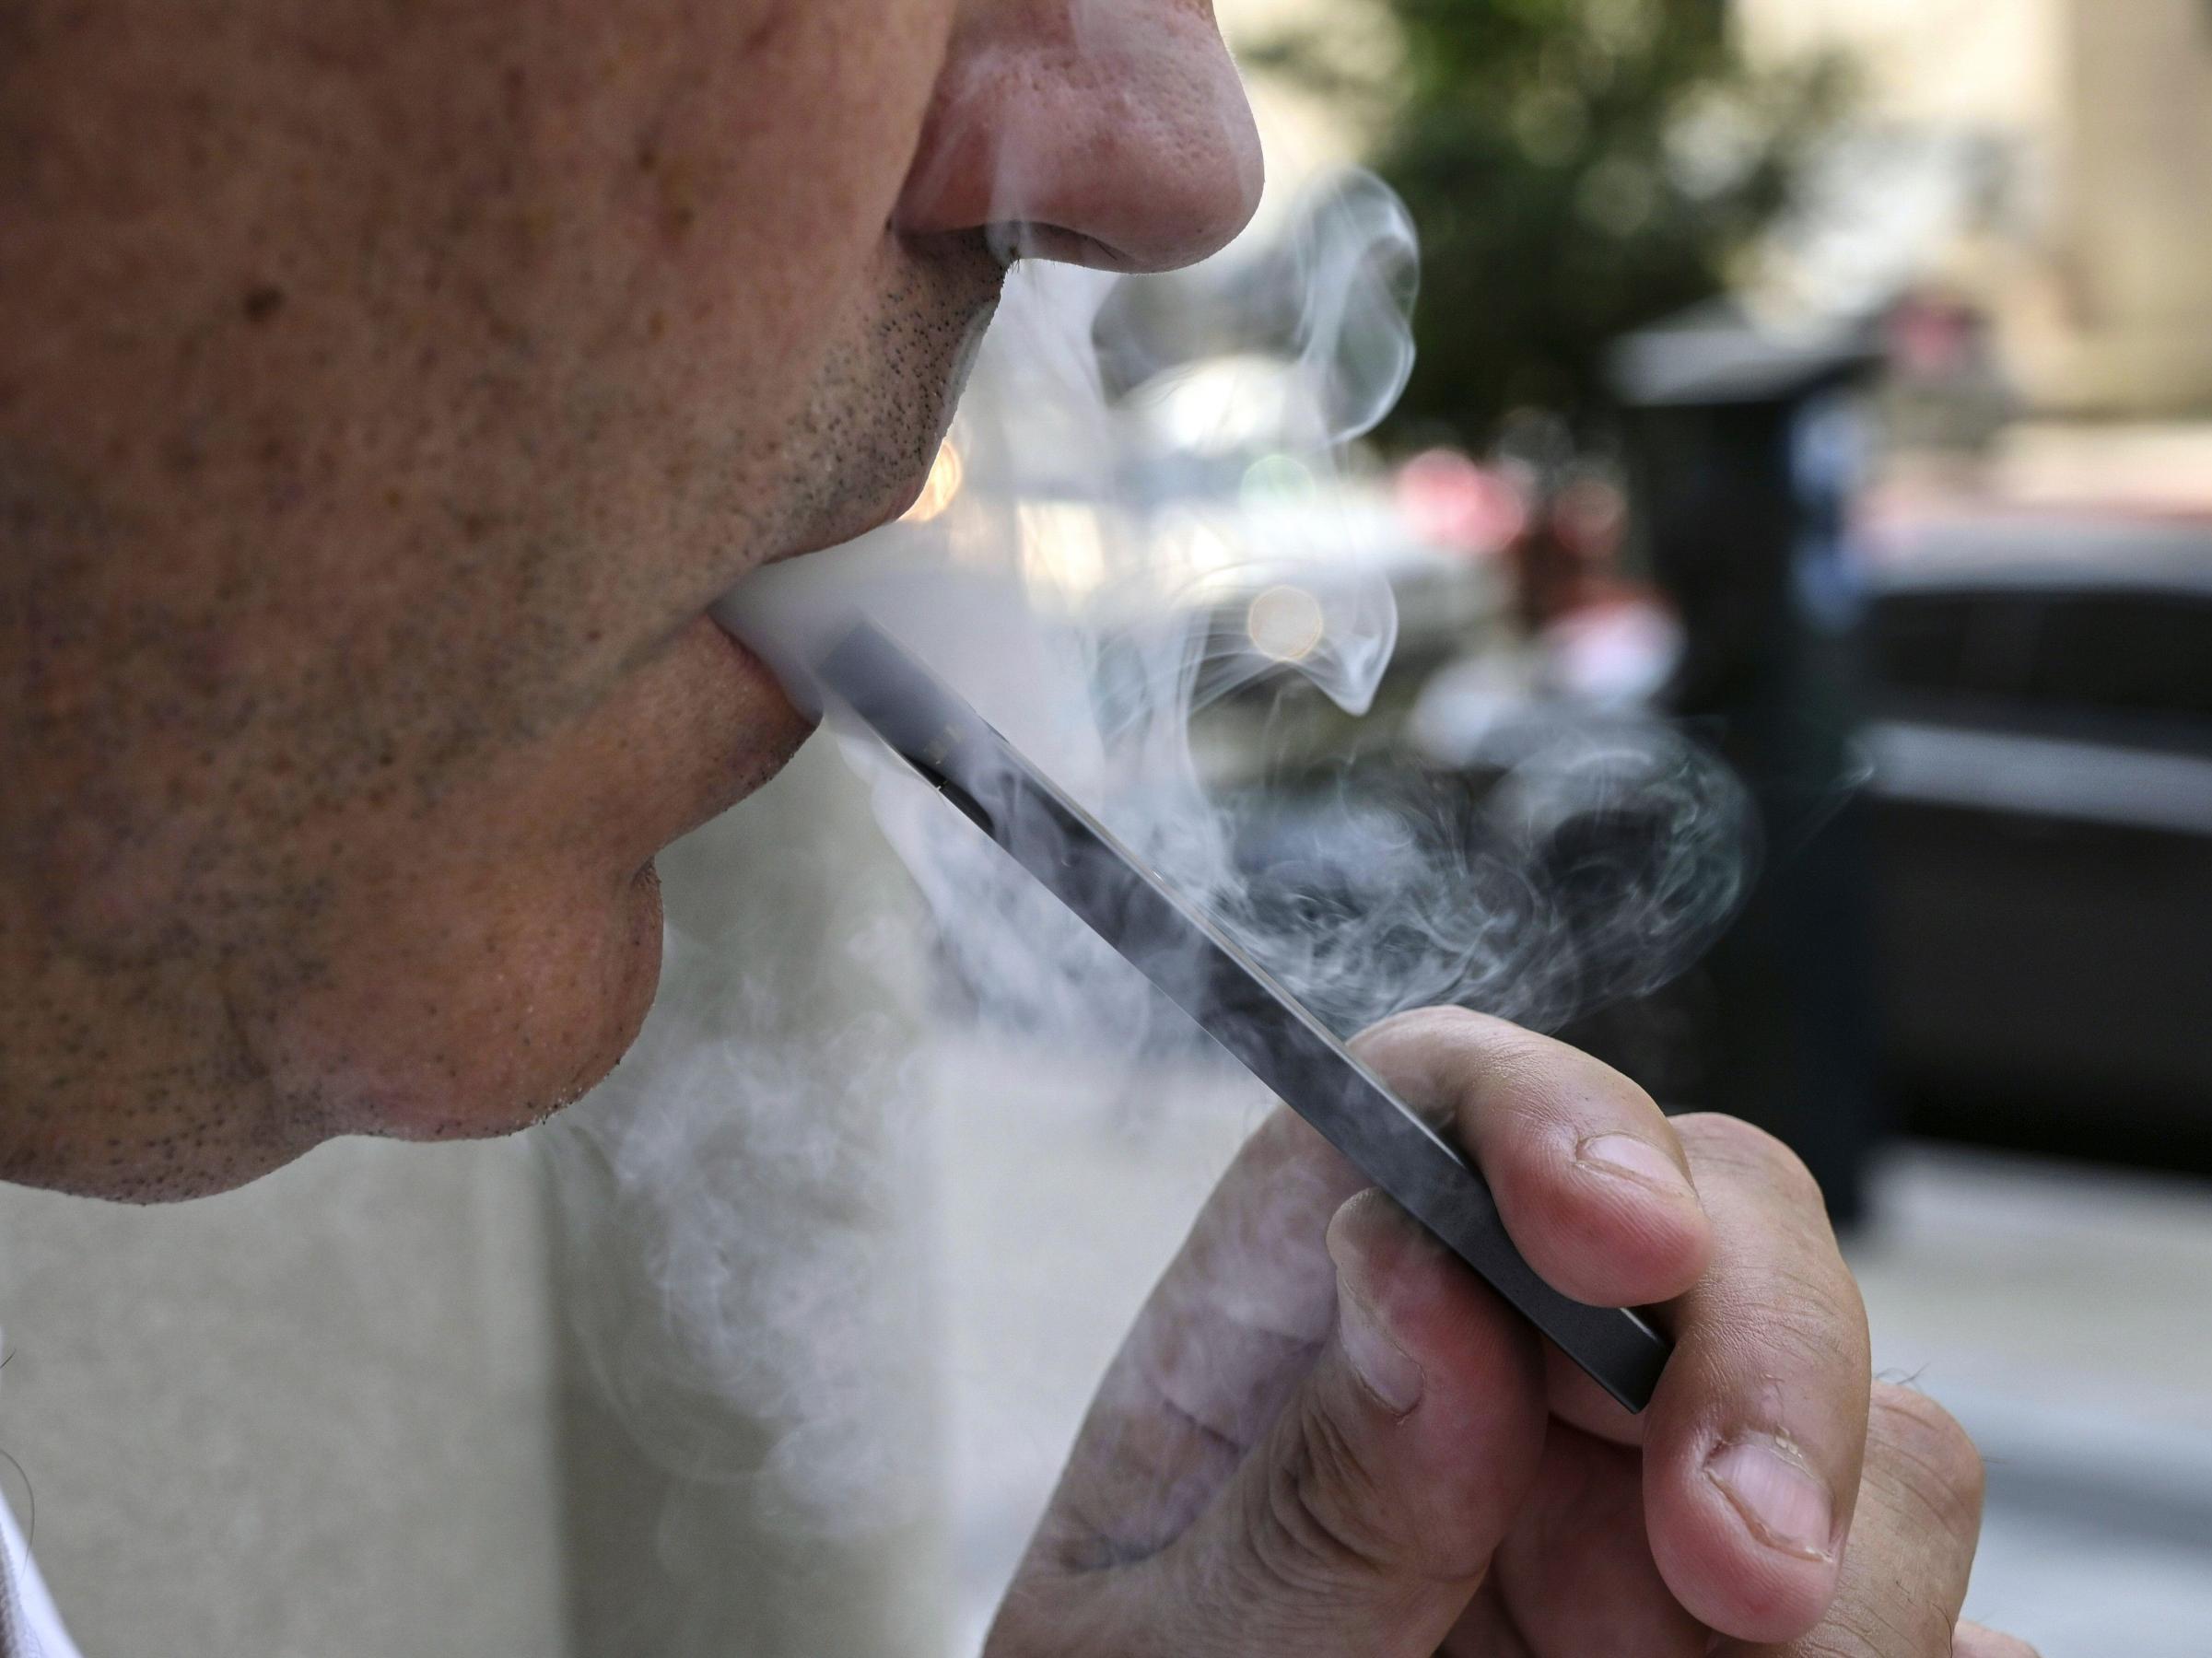 11 people in the US have now died of a vaping-related illness